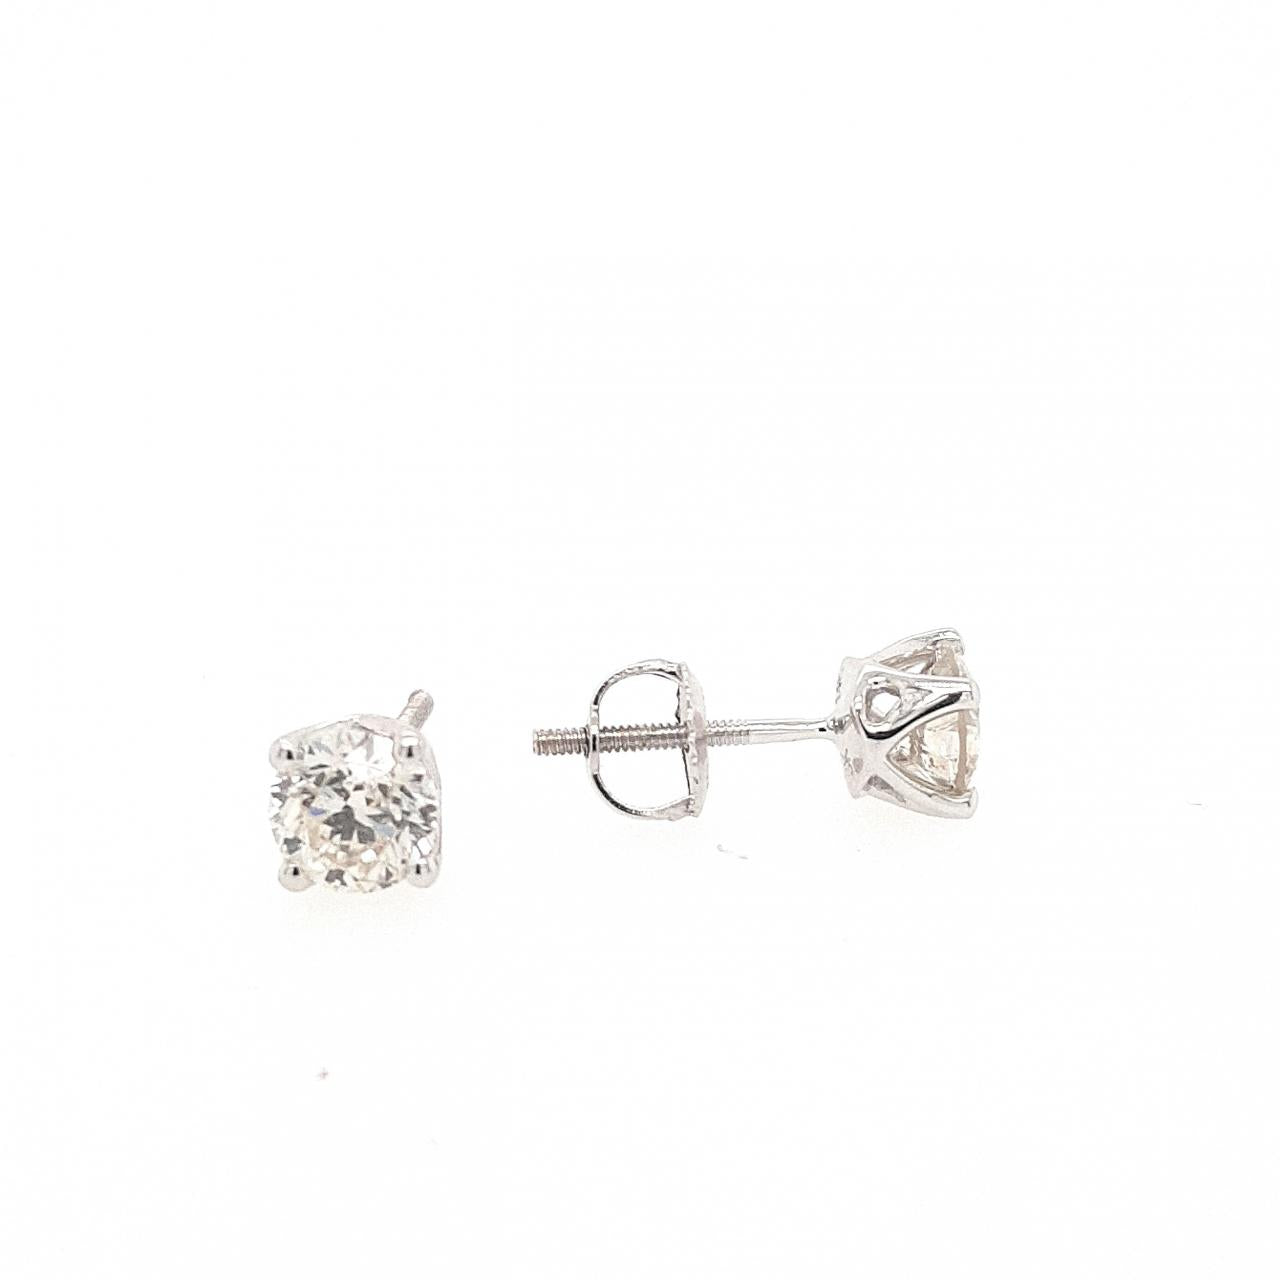 14ct White Gold 1ct Round Brilliant Cut Diamond 4 Claw Stud Screw Back Earrings